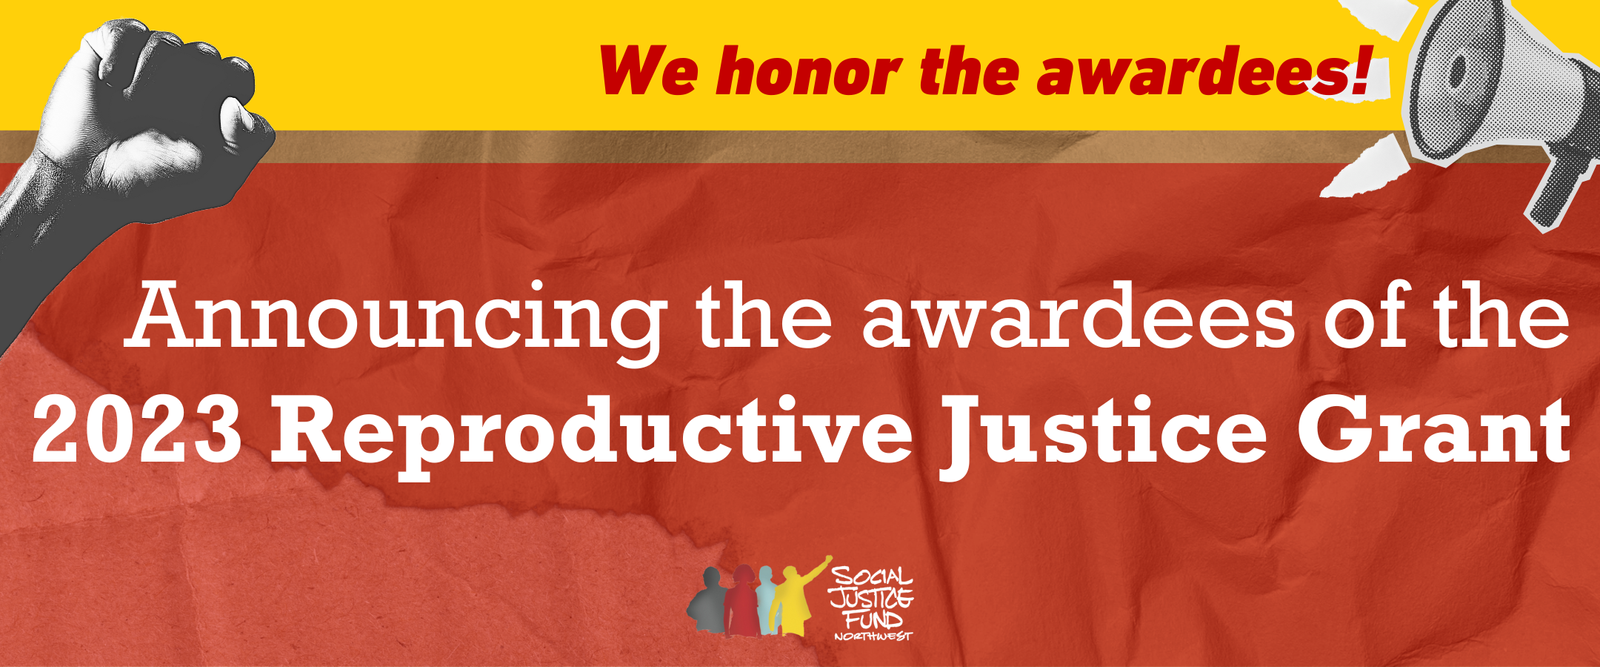 Pronouncing the awardees of the 2023 Reproductive Justice Grant!